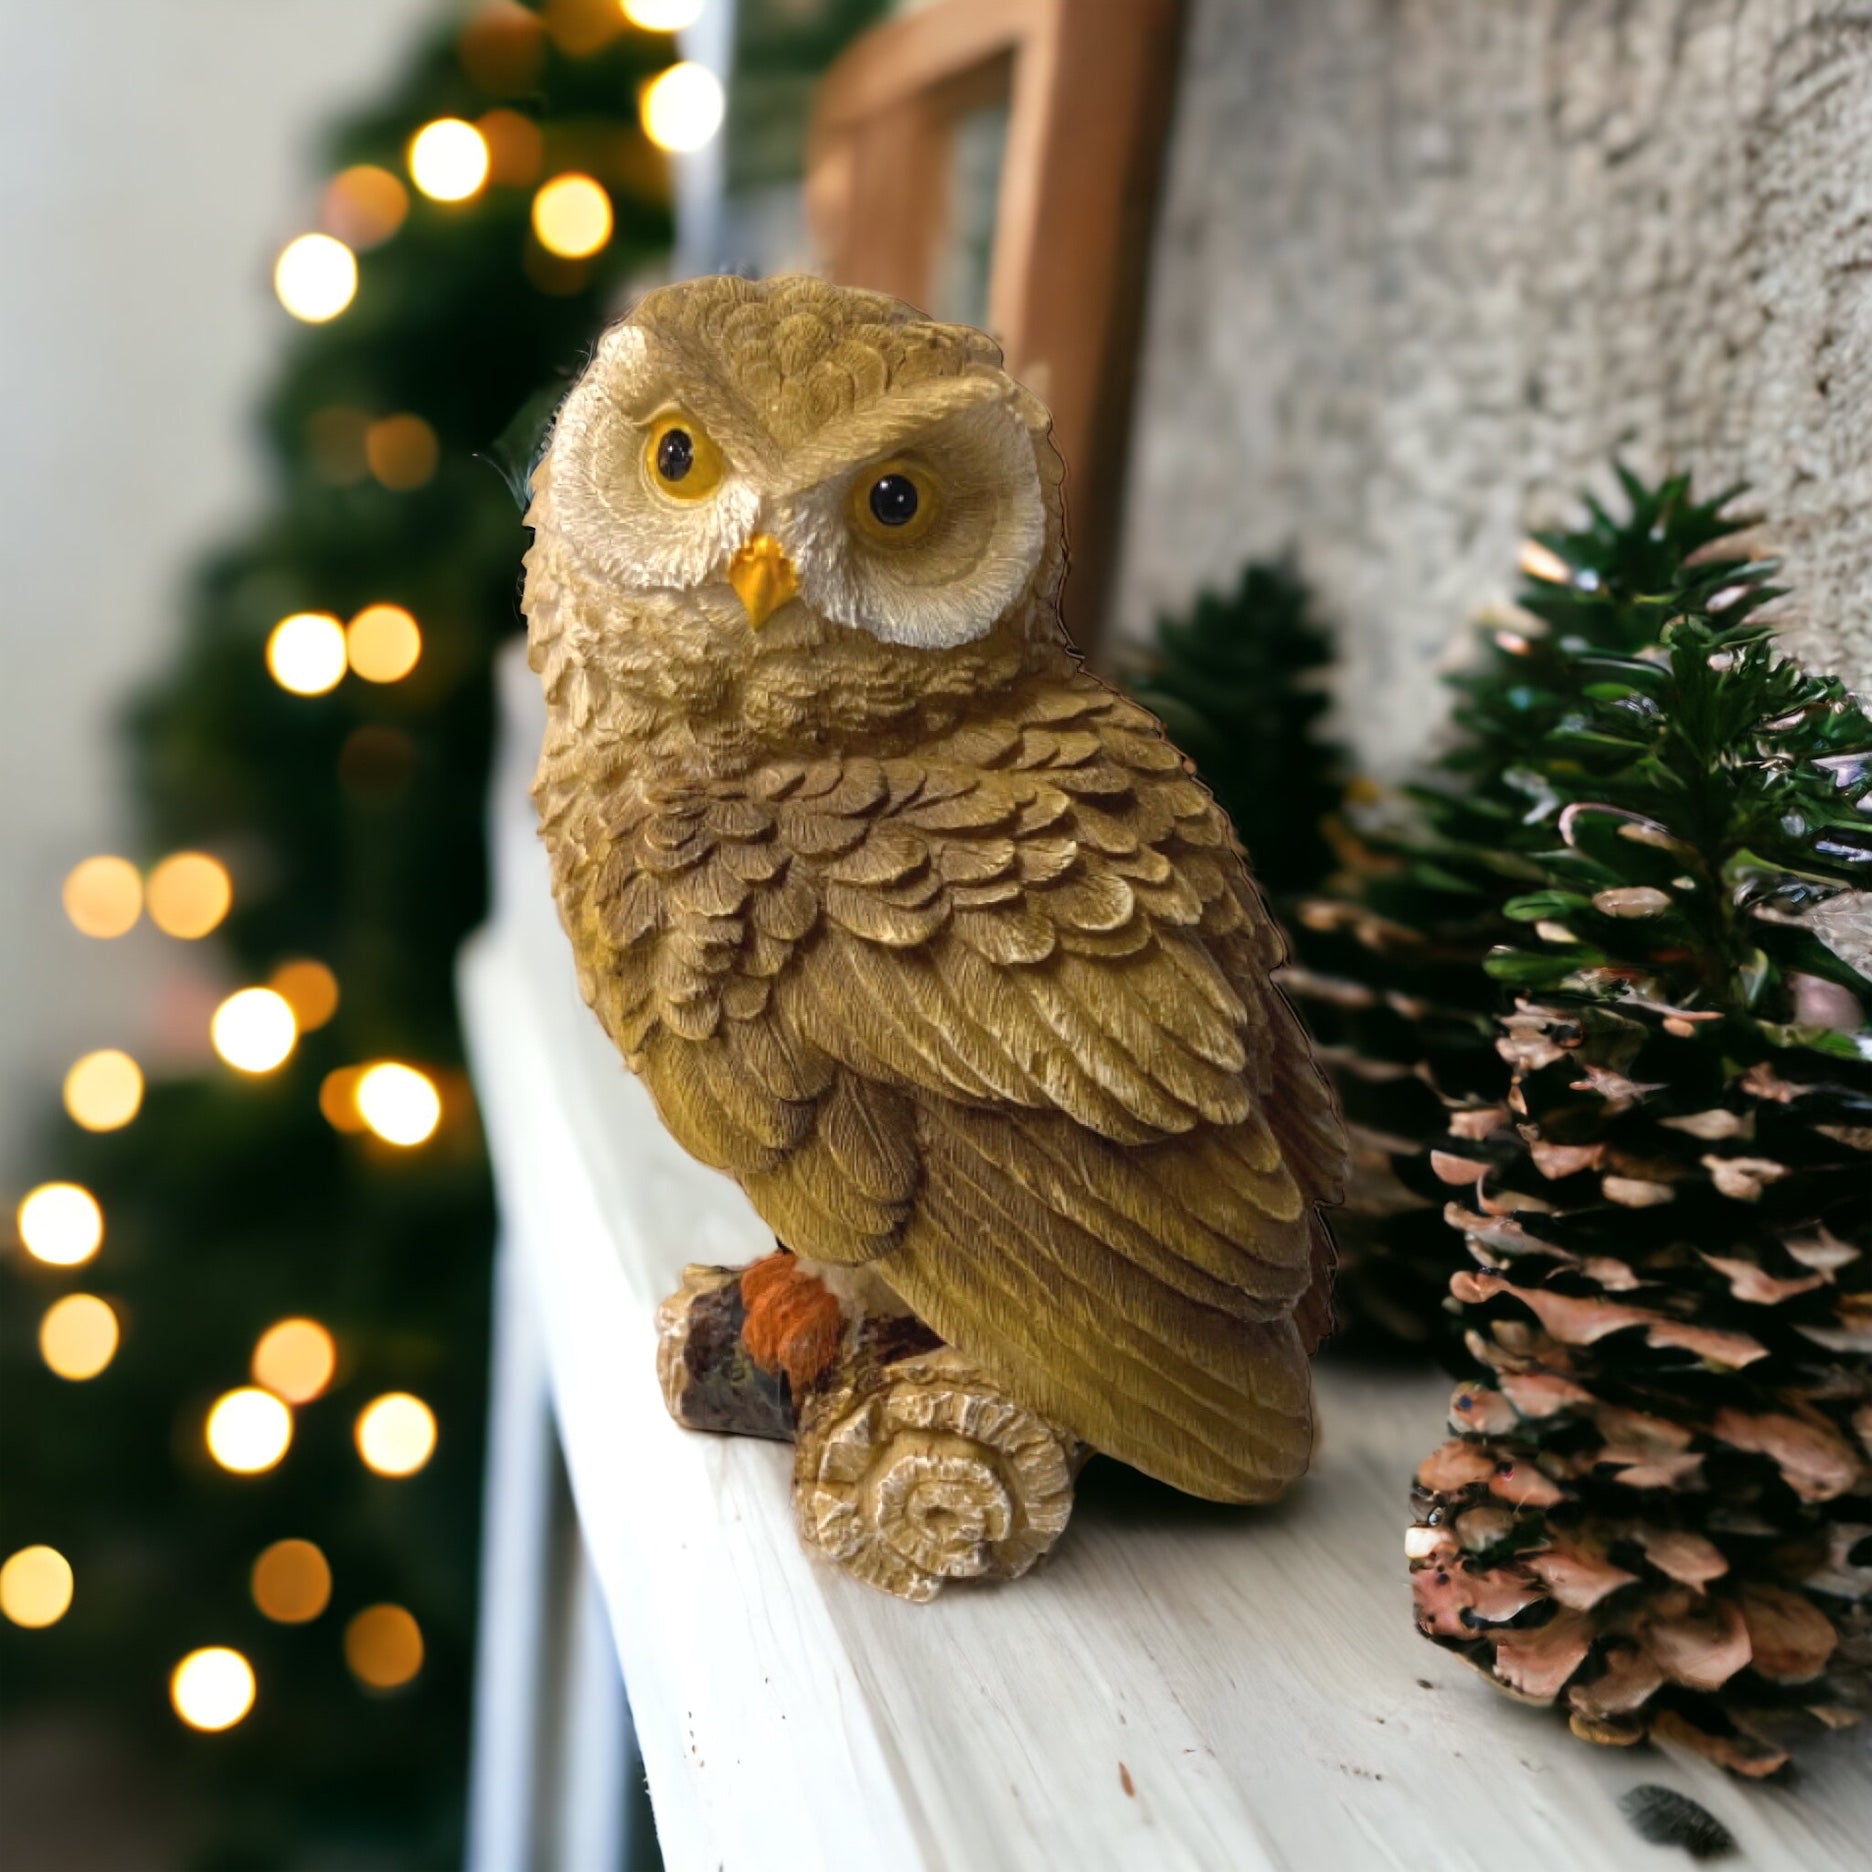 Owl Realistic Wild Bird Ornament - The Renmy Store Homewares & Gifts 